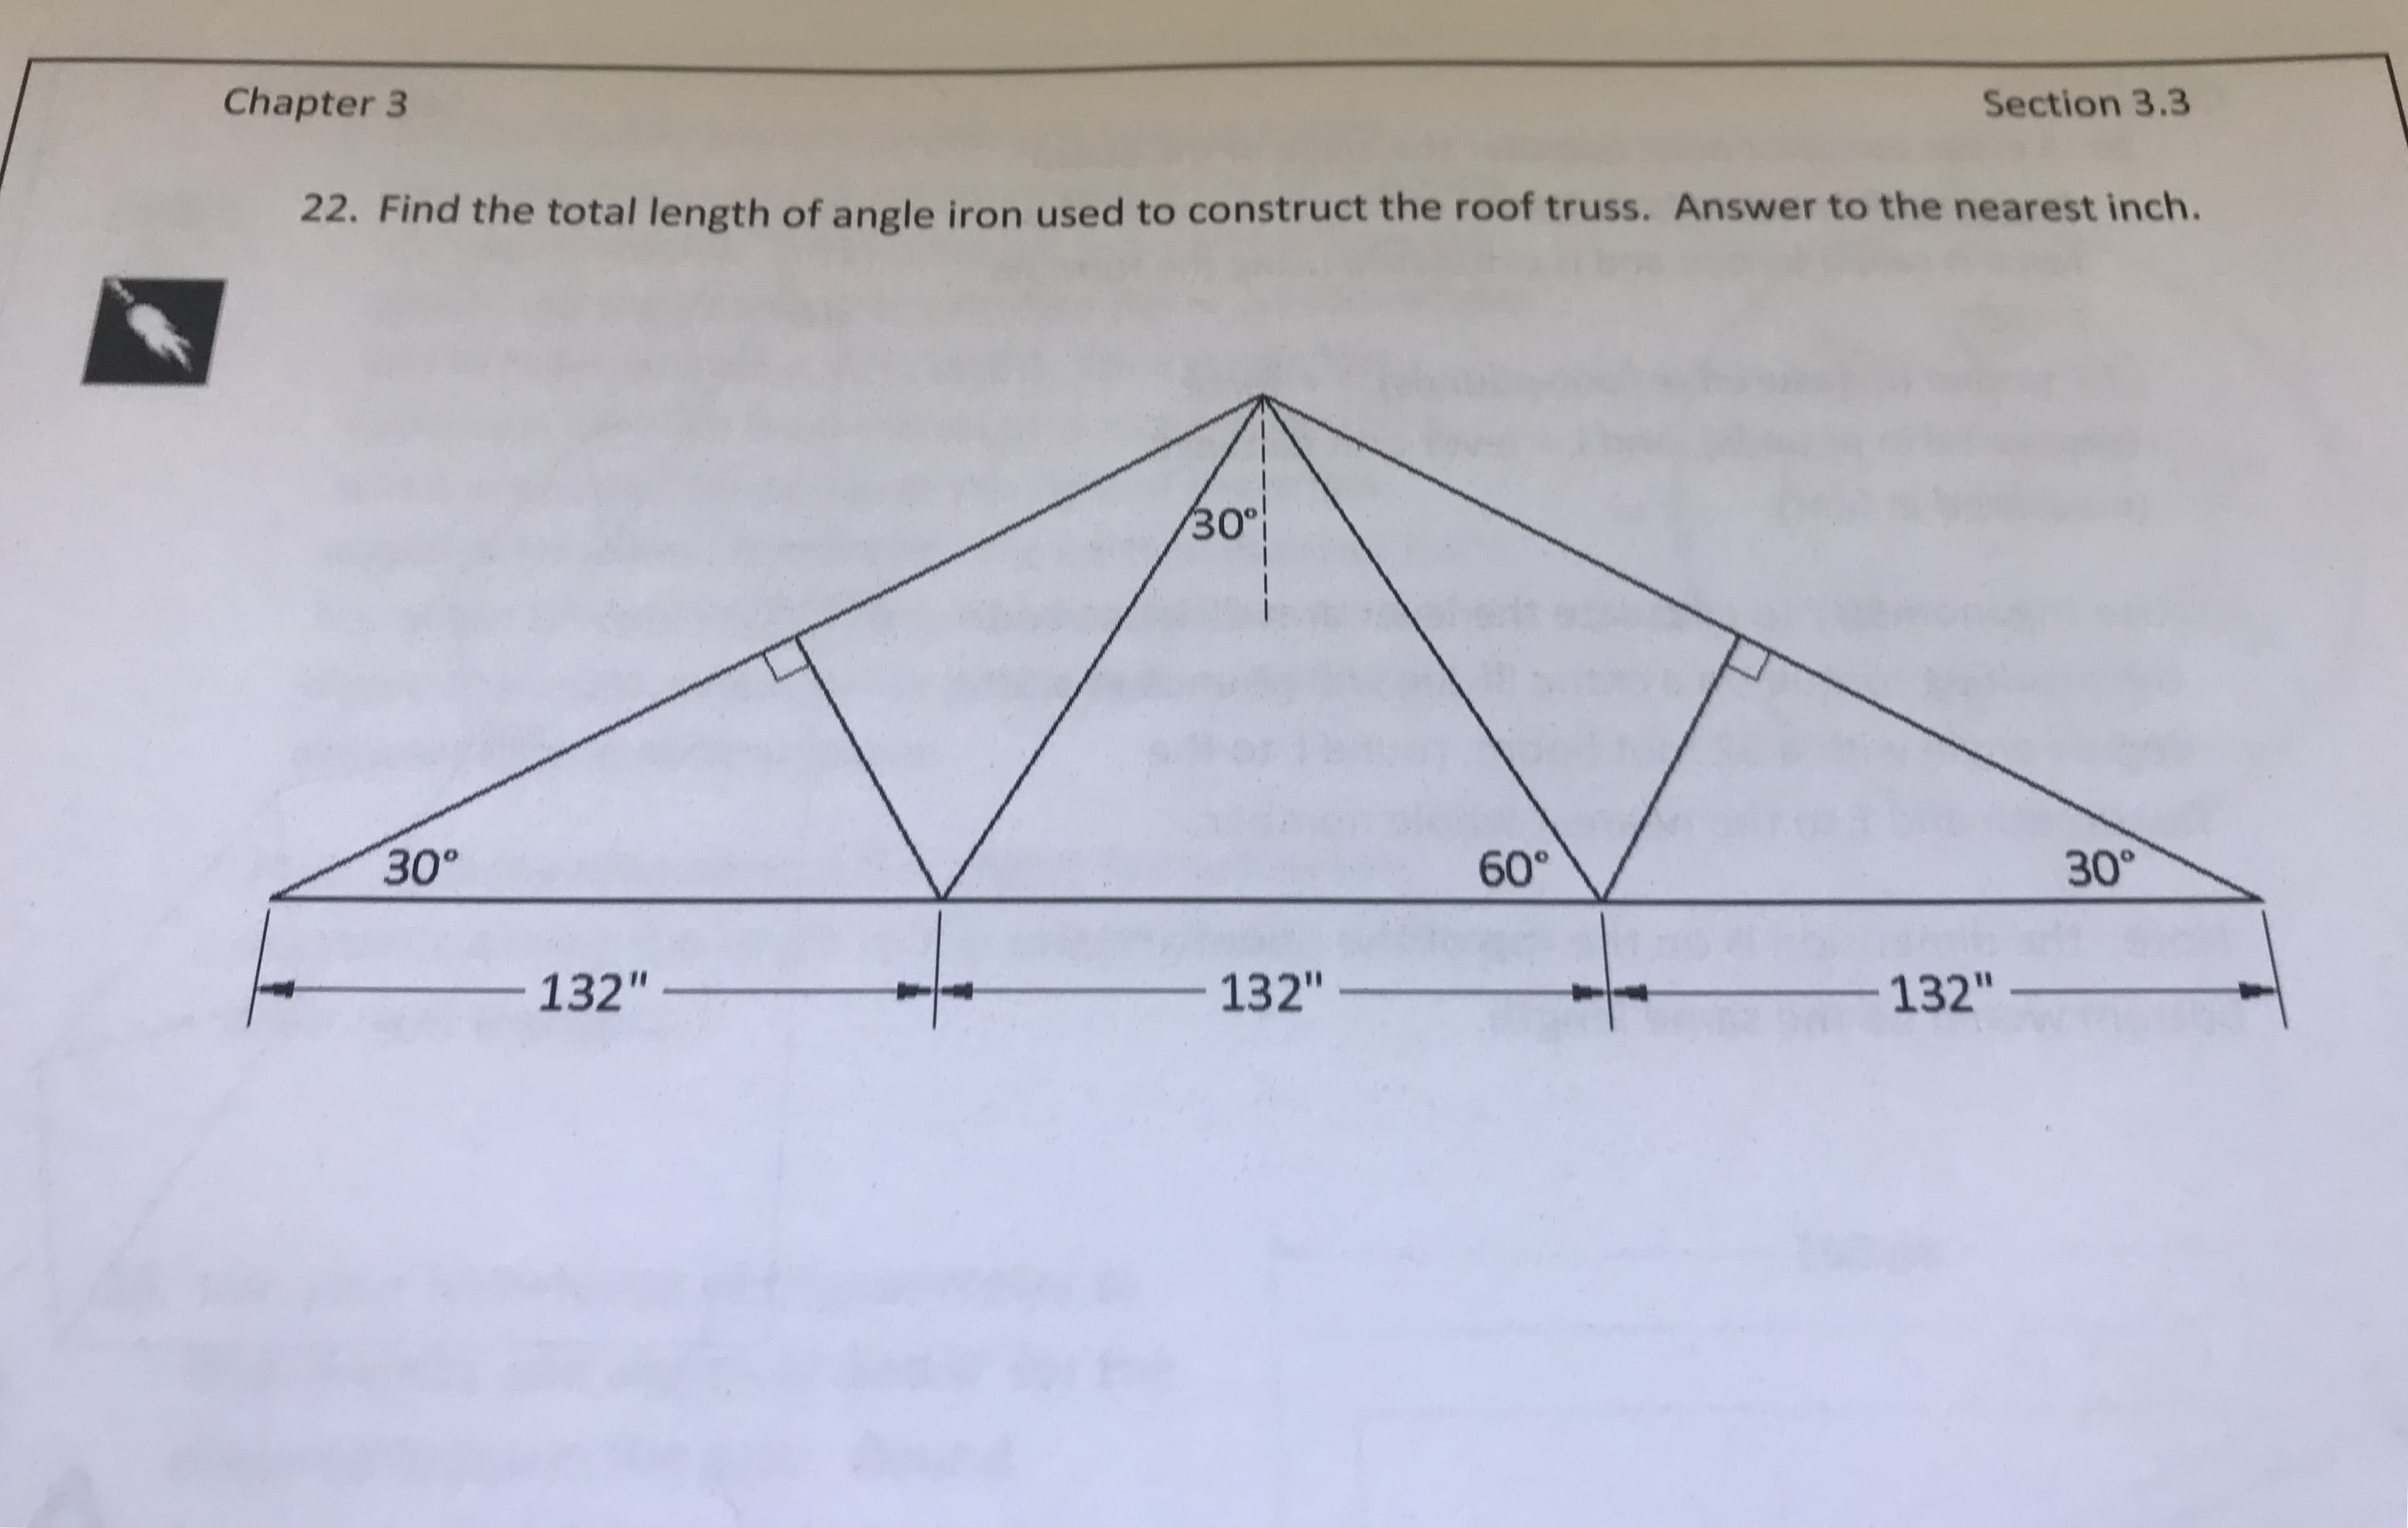 Chapter 3
Section 3.3
22. Find the total length of angle iron used to construct the roof truss. Answer to the nearest inch
O"
30°
60°
30°
132132132
